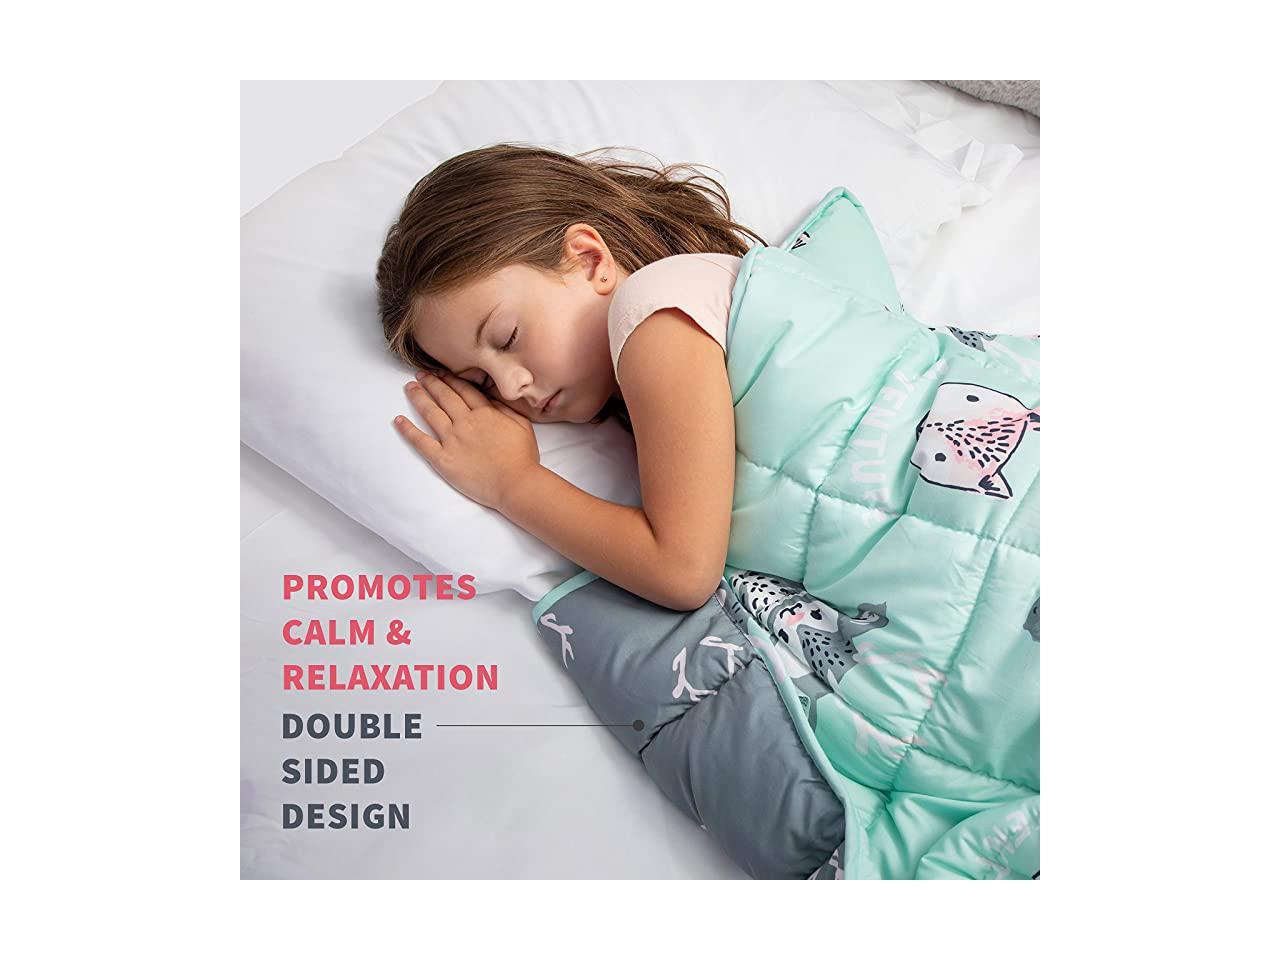 Kids Weighted Blanket 5 Pounds | Quality Weighted Blanket for Toddler